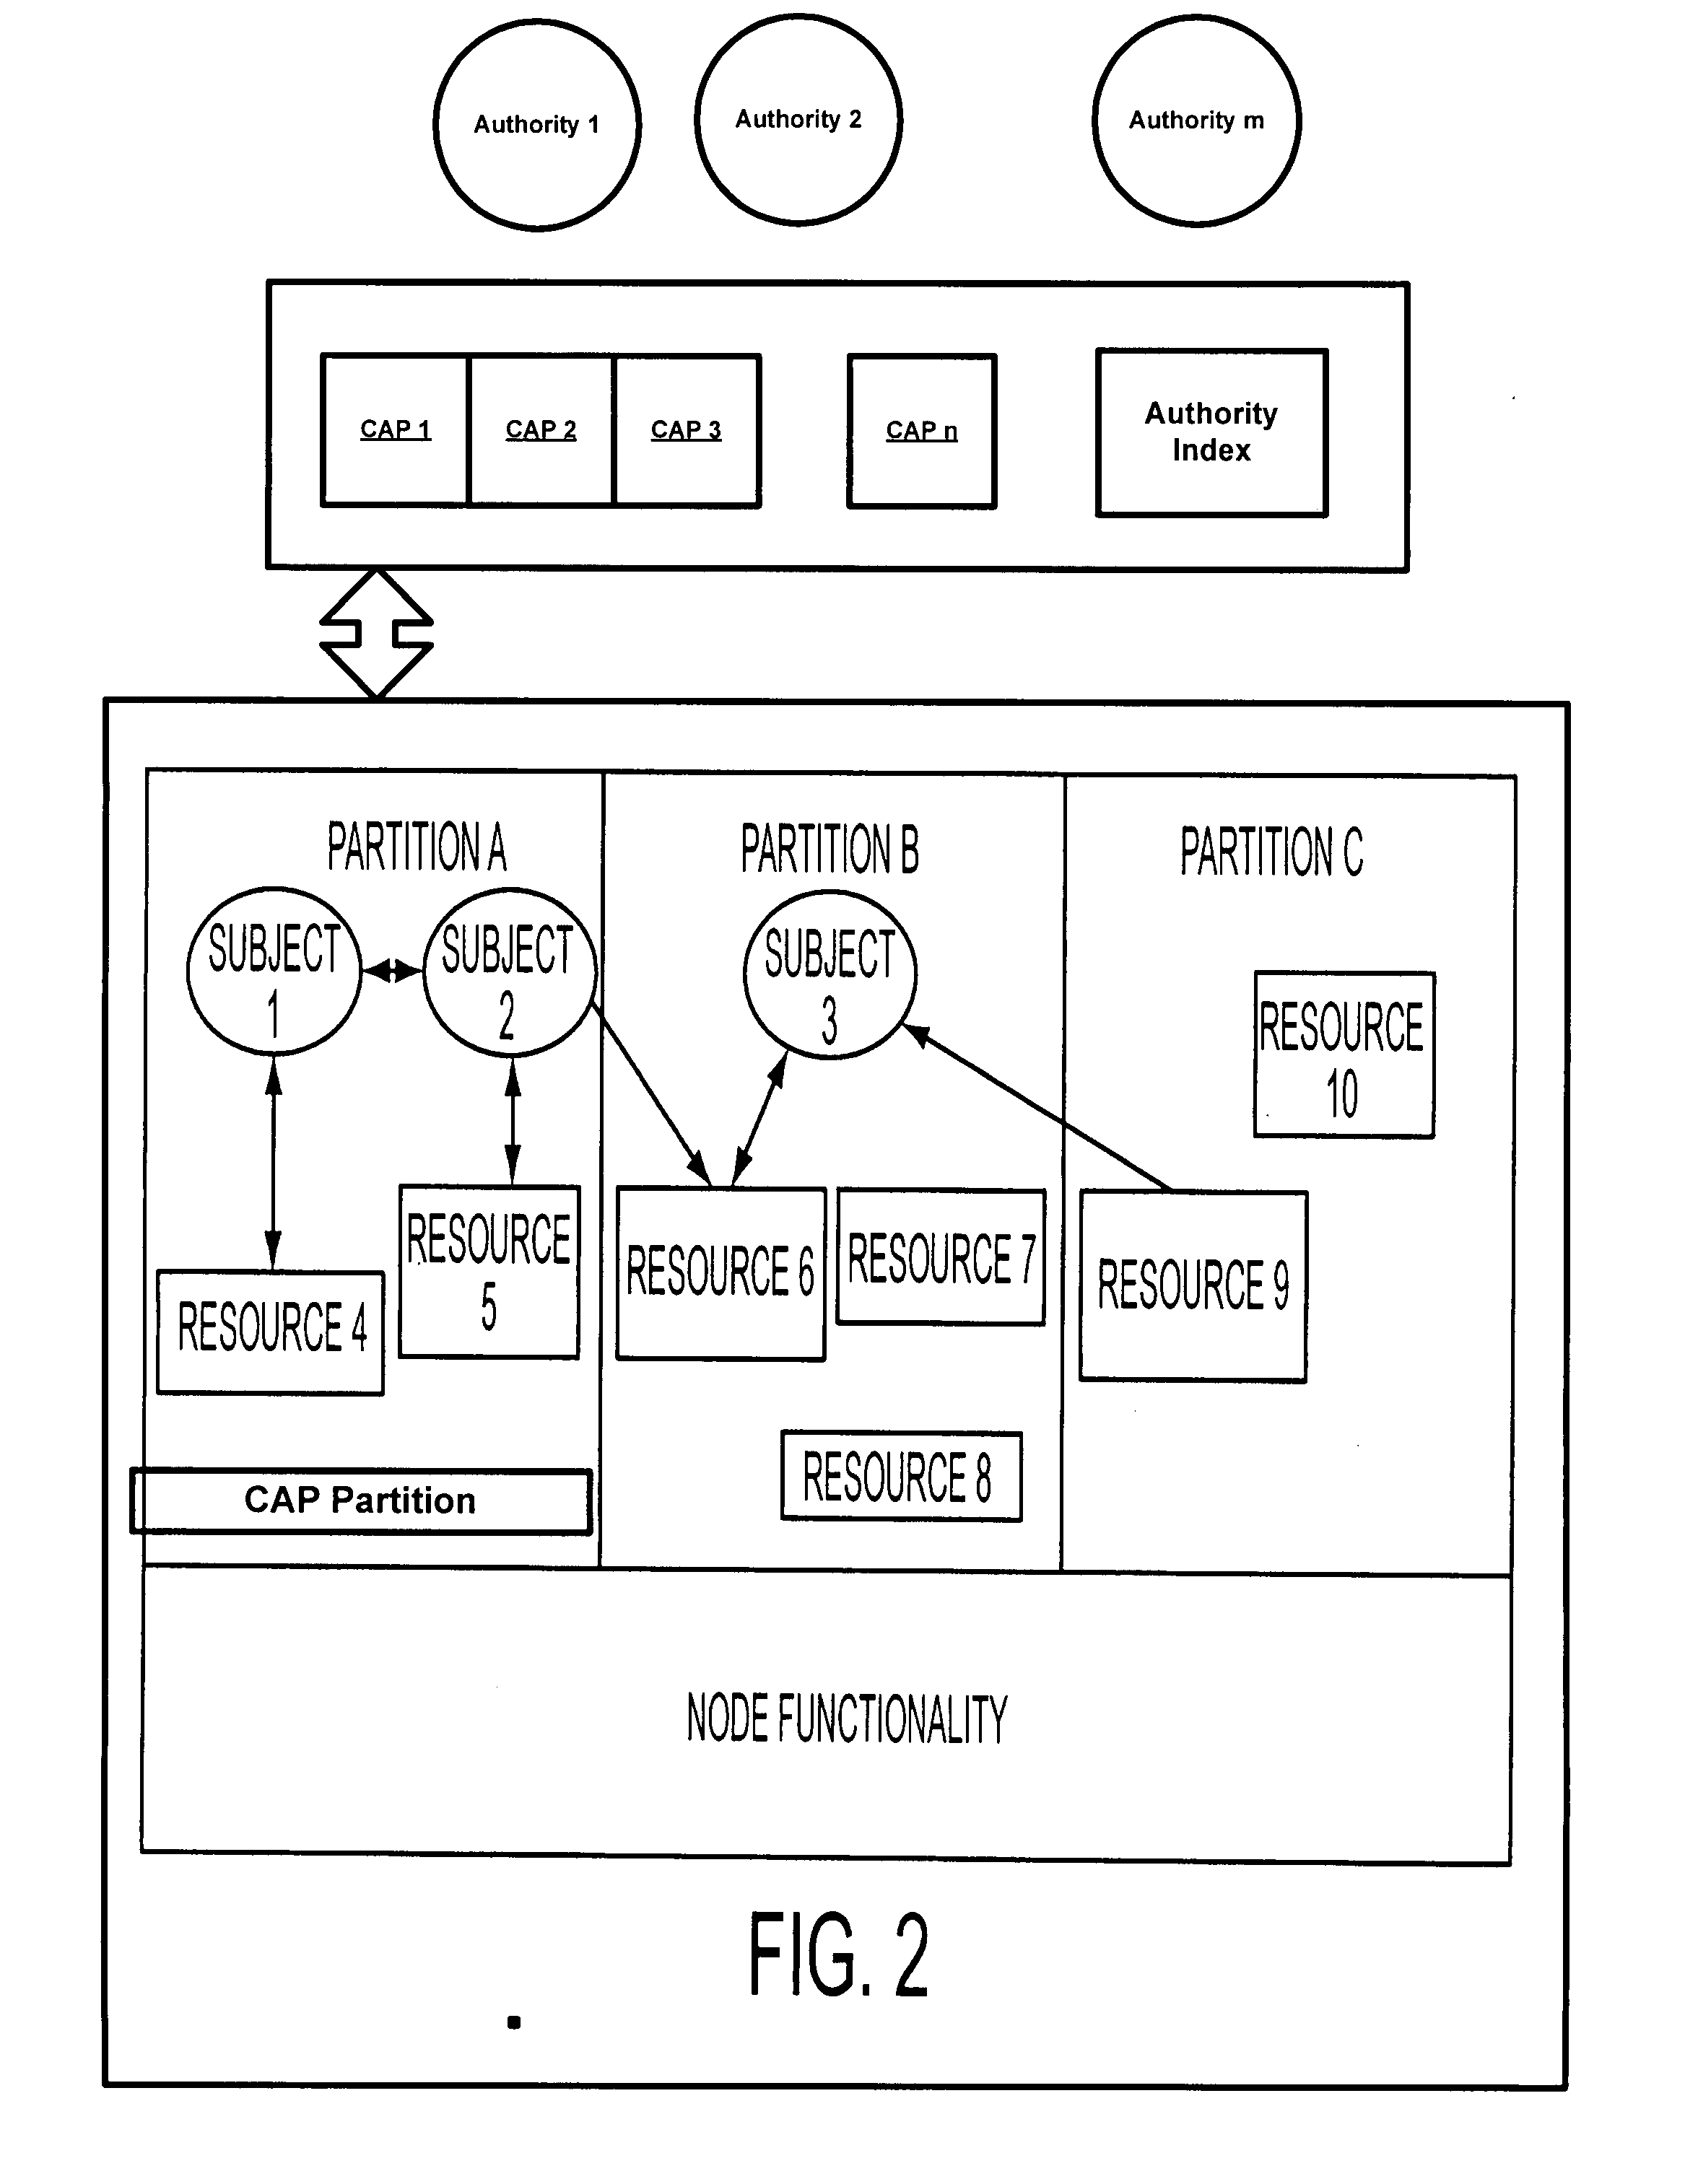 System and method for accessing information resources using cryptographic authorization permits